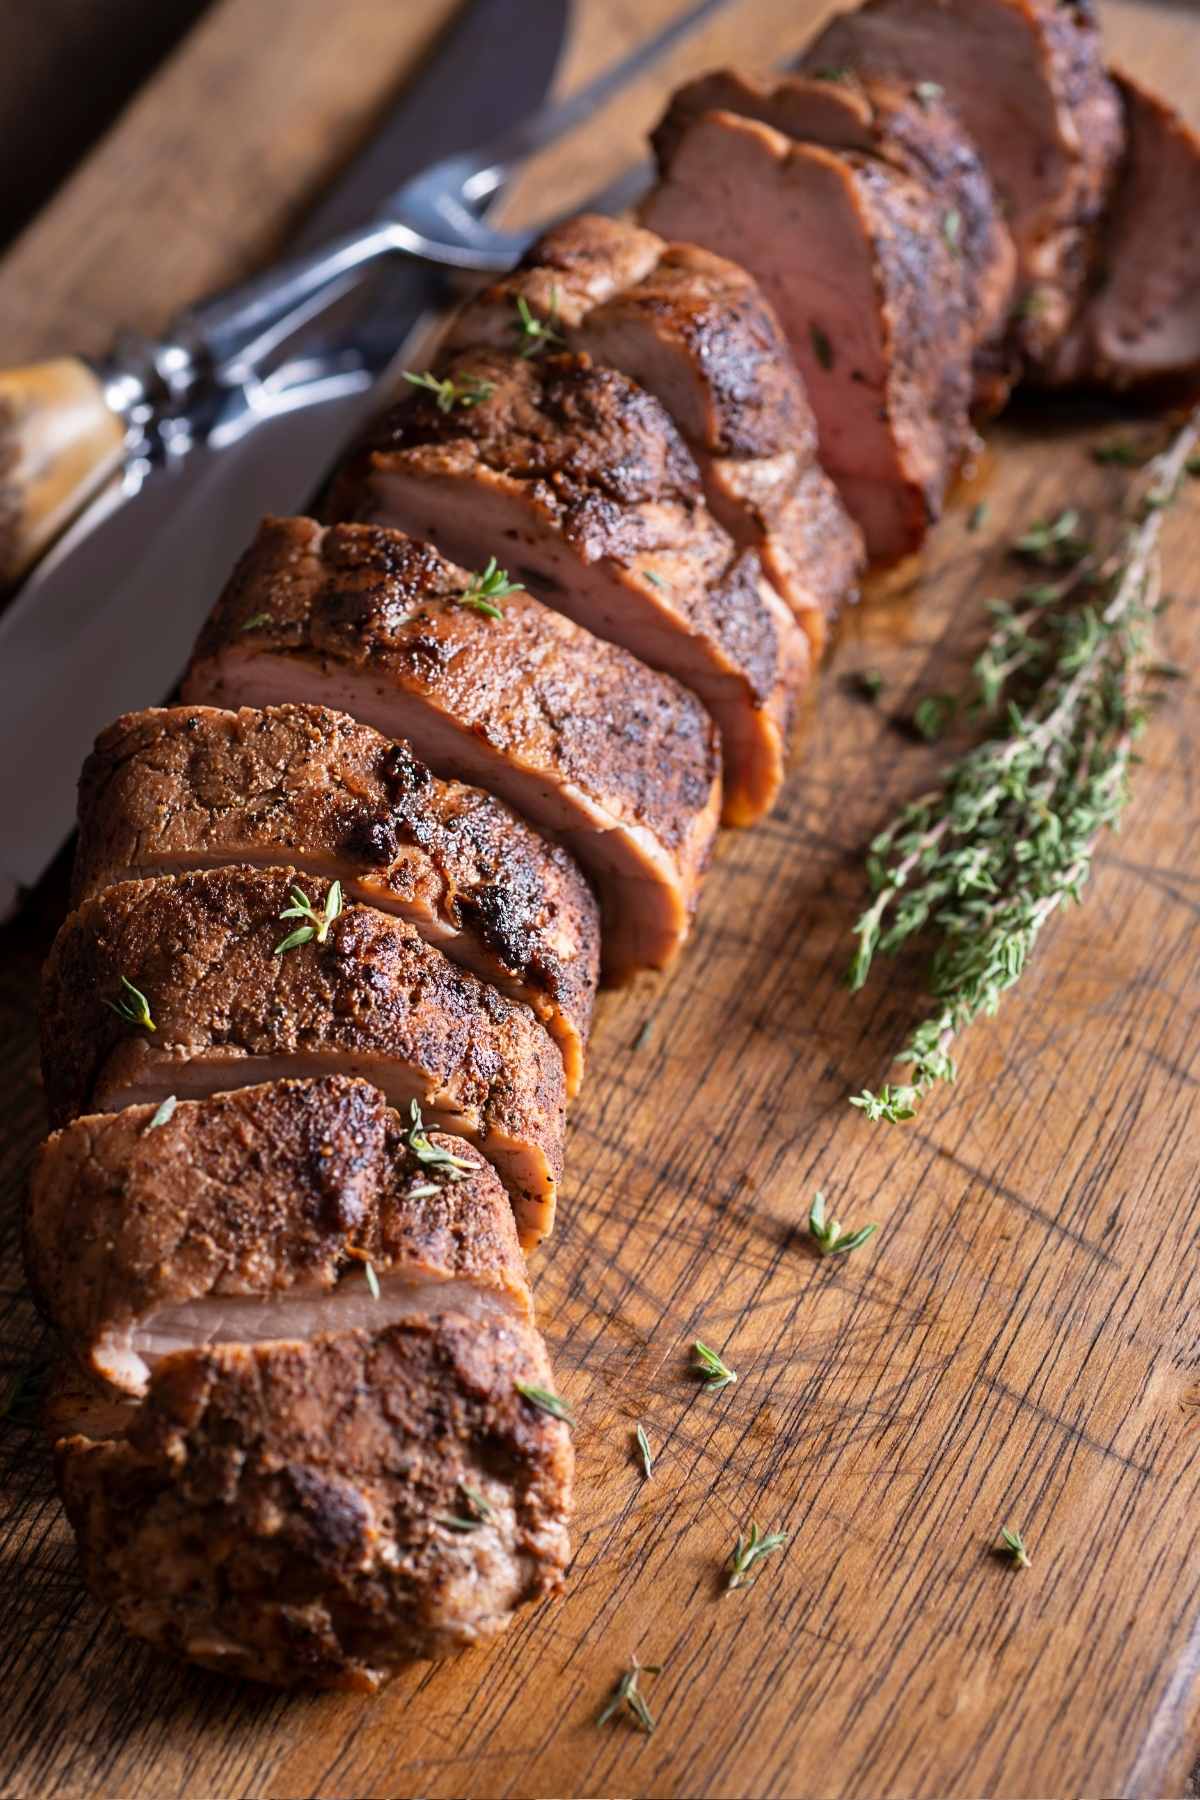 Say goodbye to tough and dry pork tenderloin with this internal temperature guide. In this post, we’re sharing some tips on how to cook pork tenderloin so it’s moist, juicy and delicious!